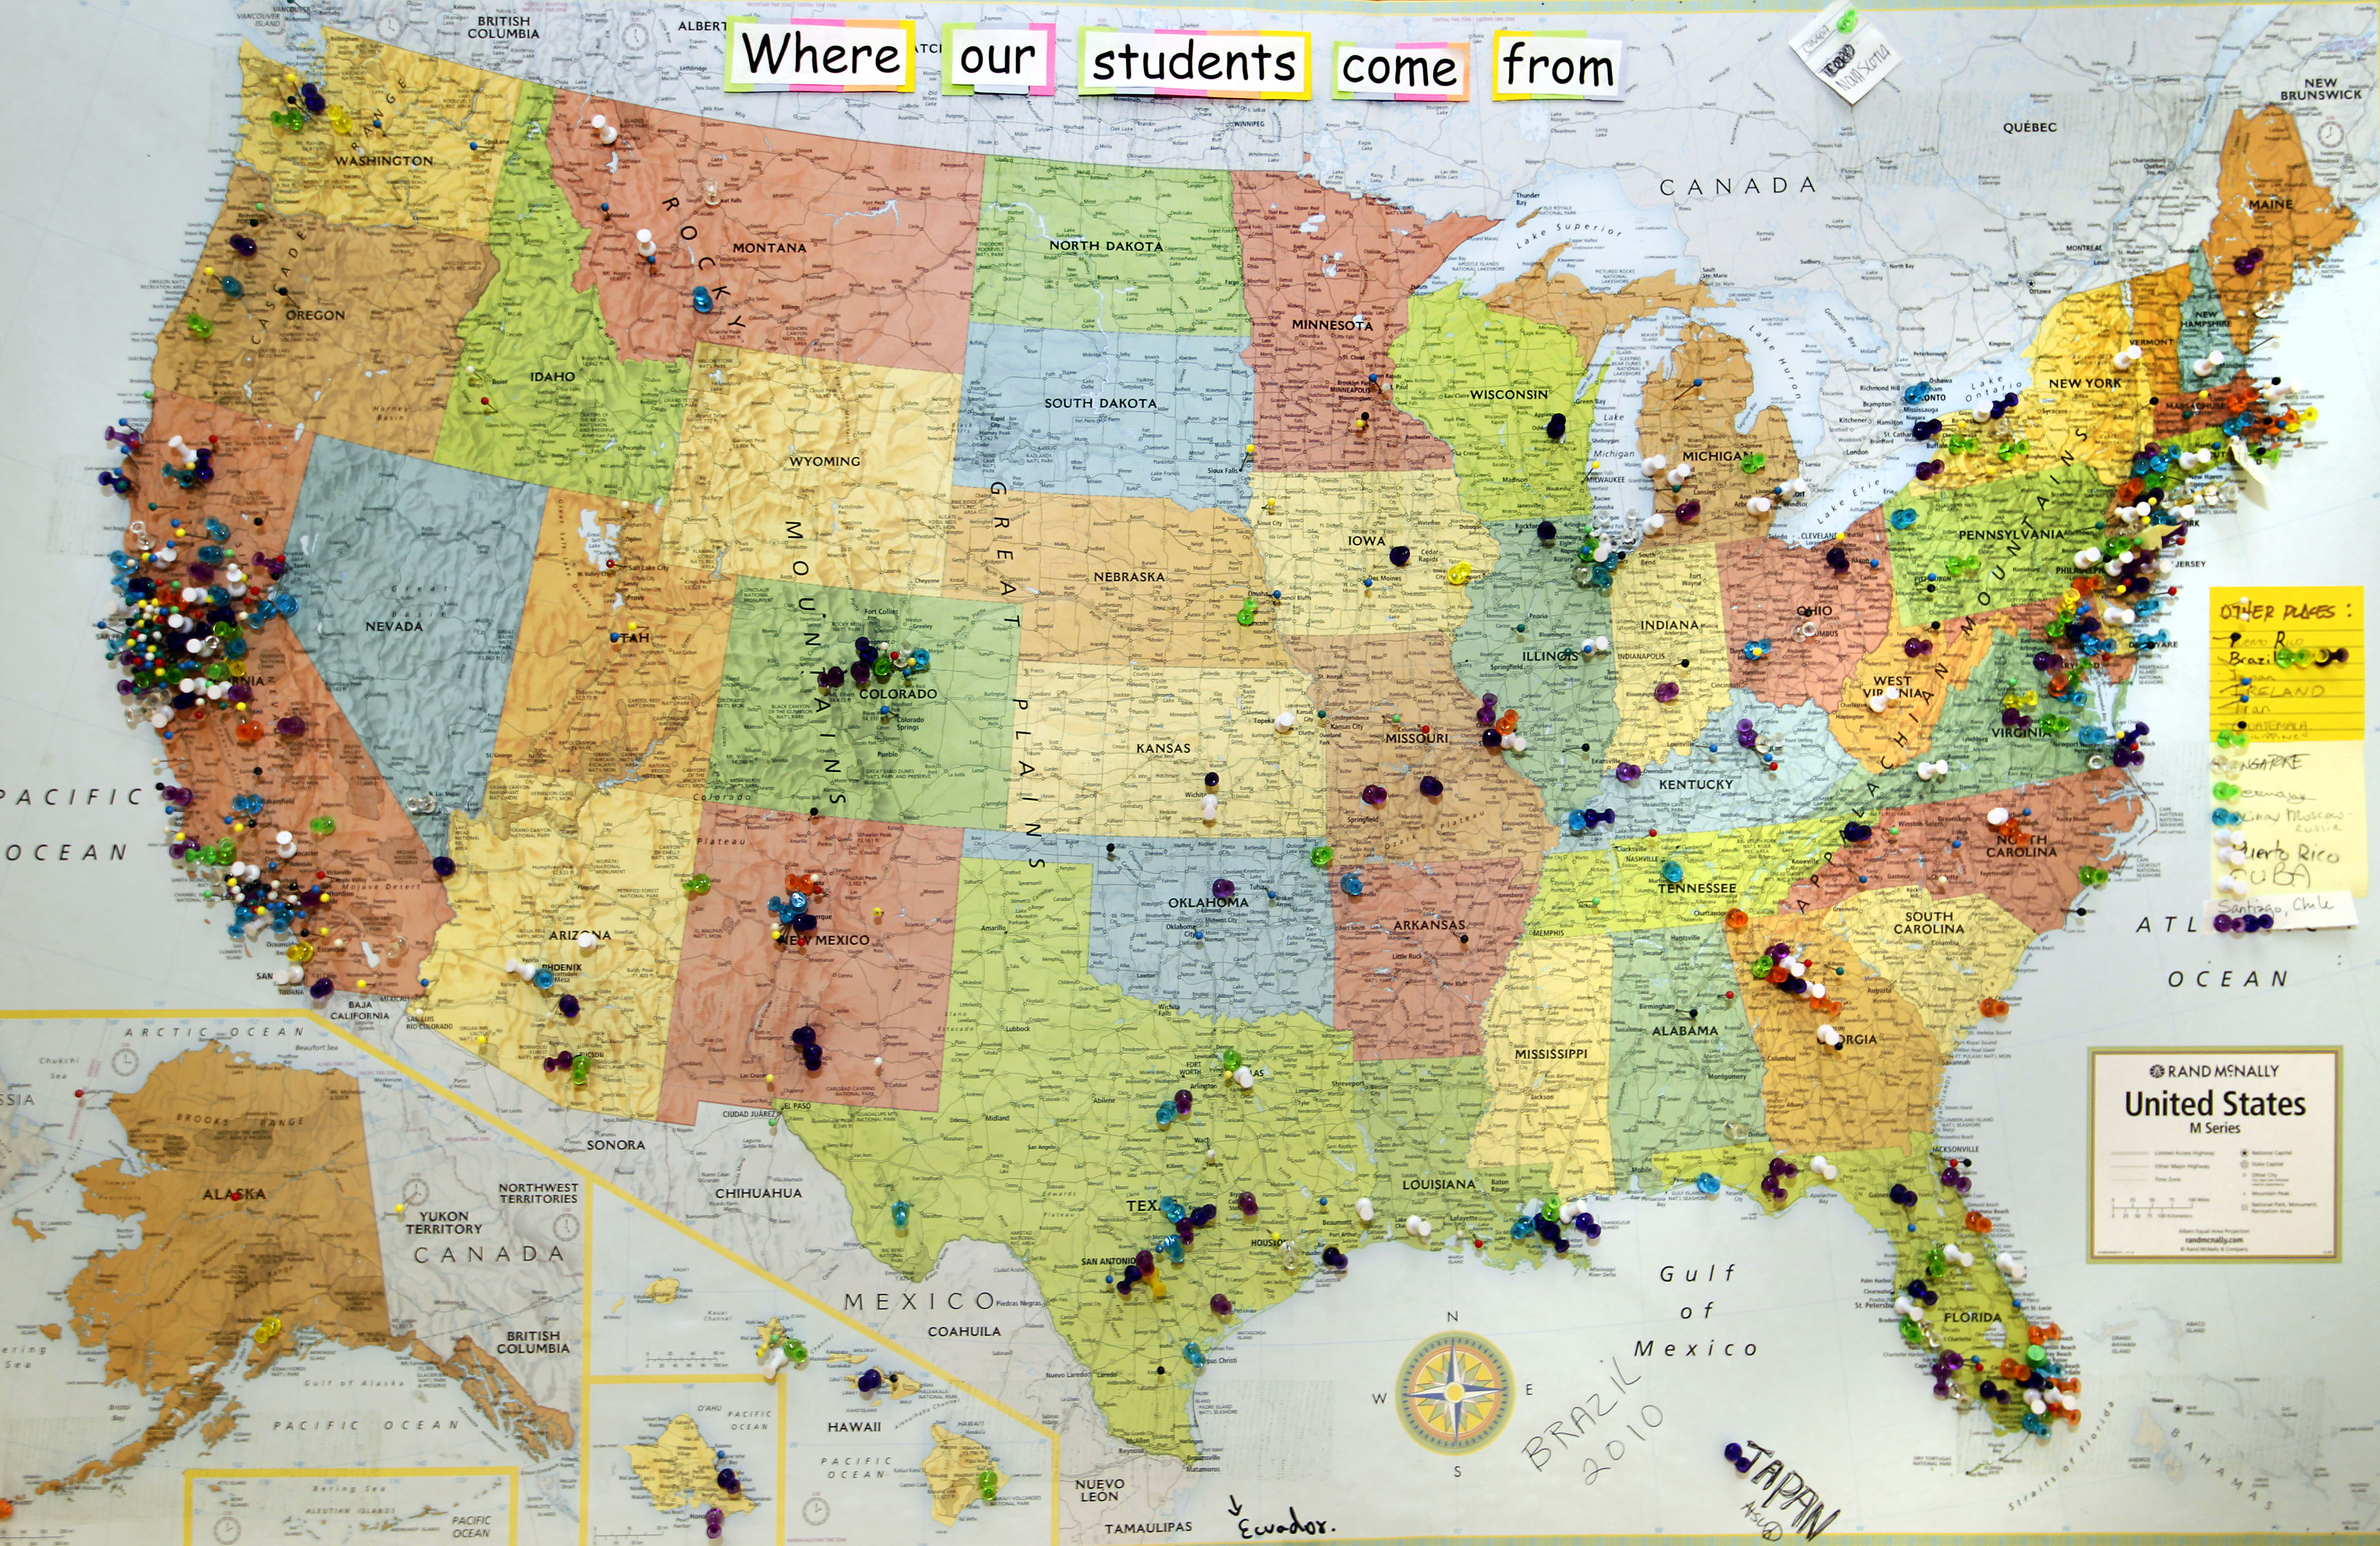 Pins in a United States map show where students have come from to take classes at Oaksterdam University, the nation's first marijuana trade school, on Sept. 23, 2010 in Oakland. (Tony Avelar—The Christian Science Monitor/Getty Images)